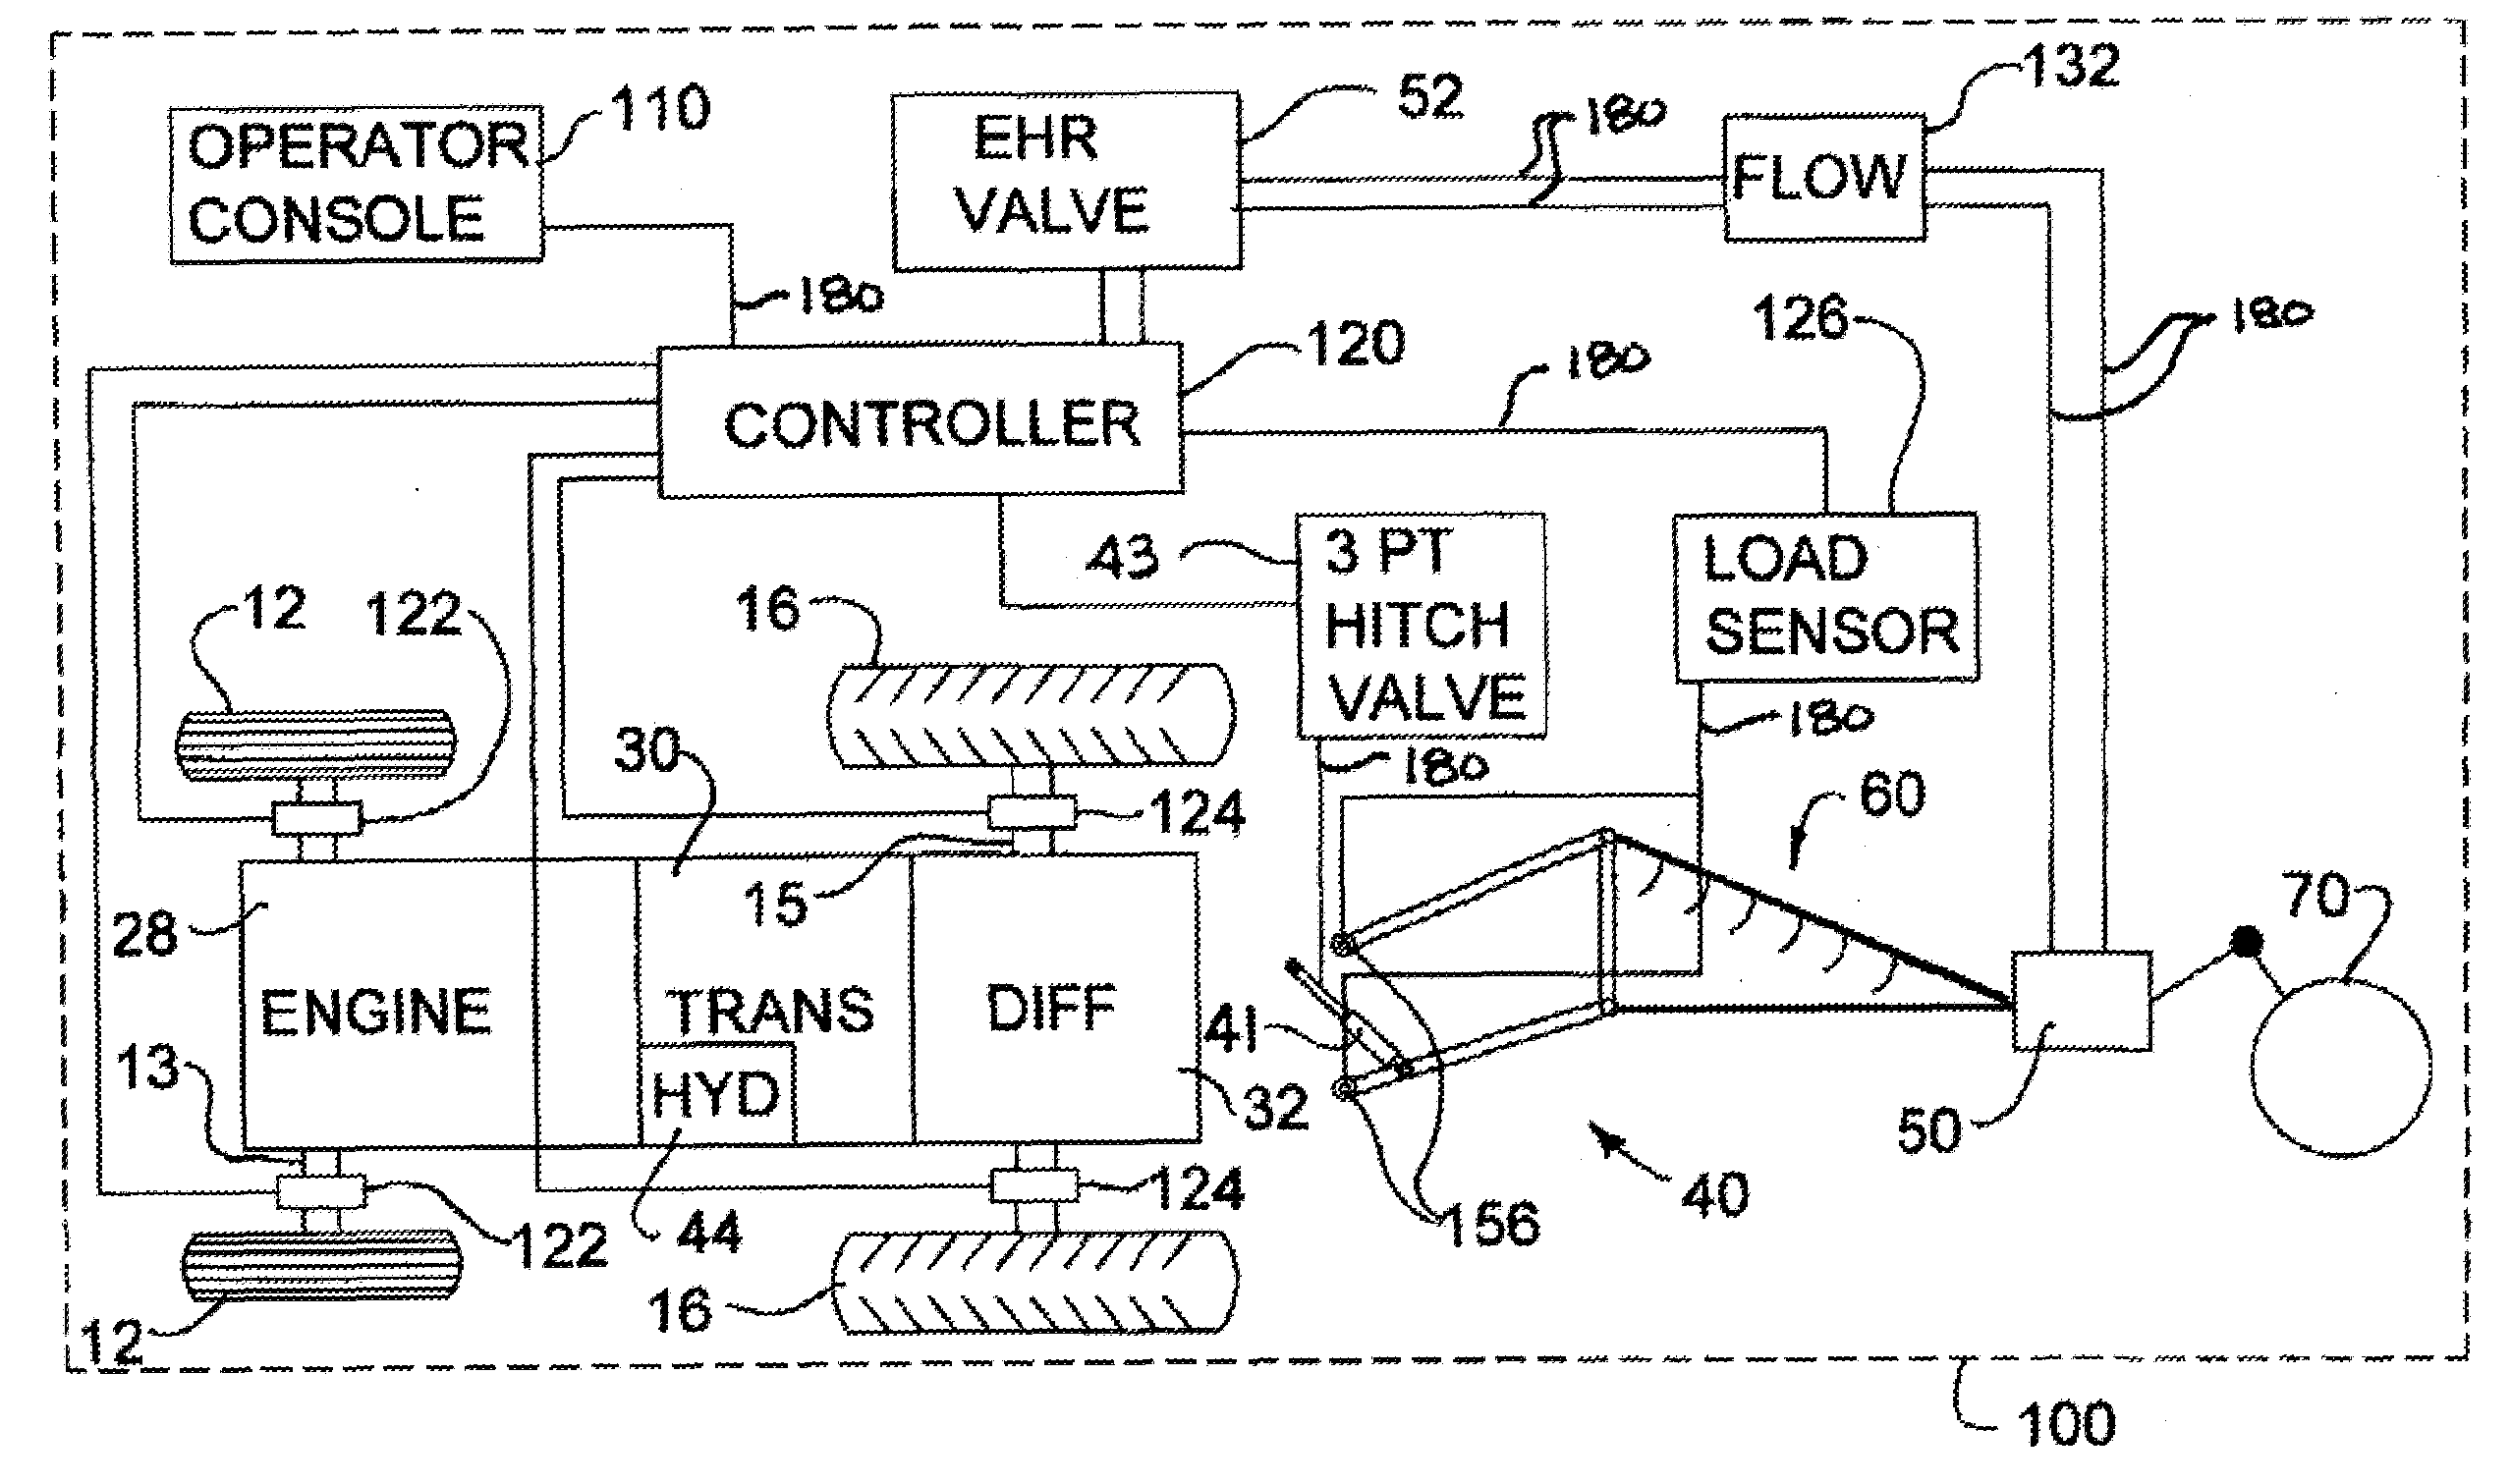 Electronic draft control for semi-trailed implements